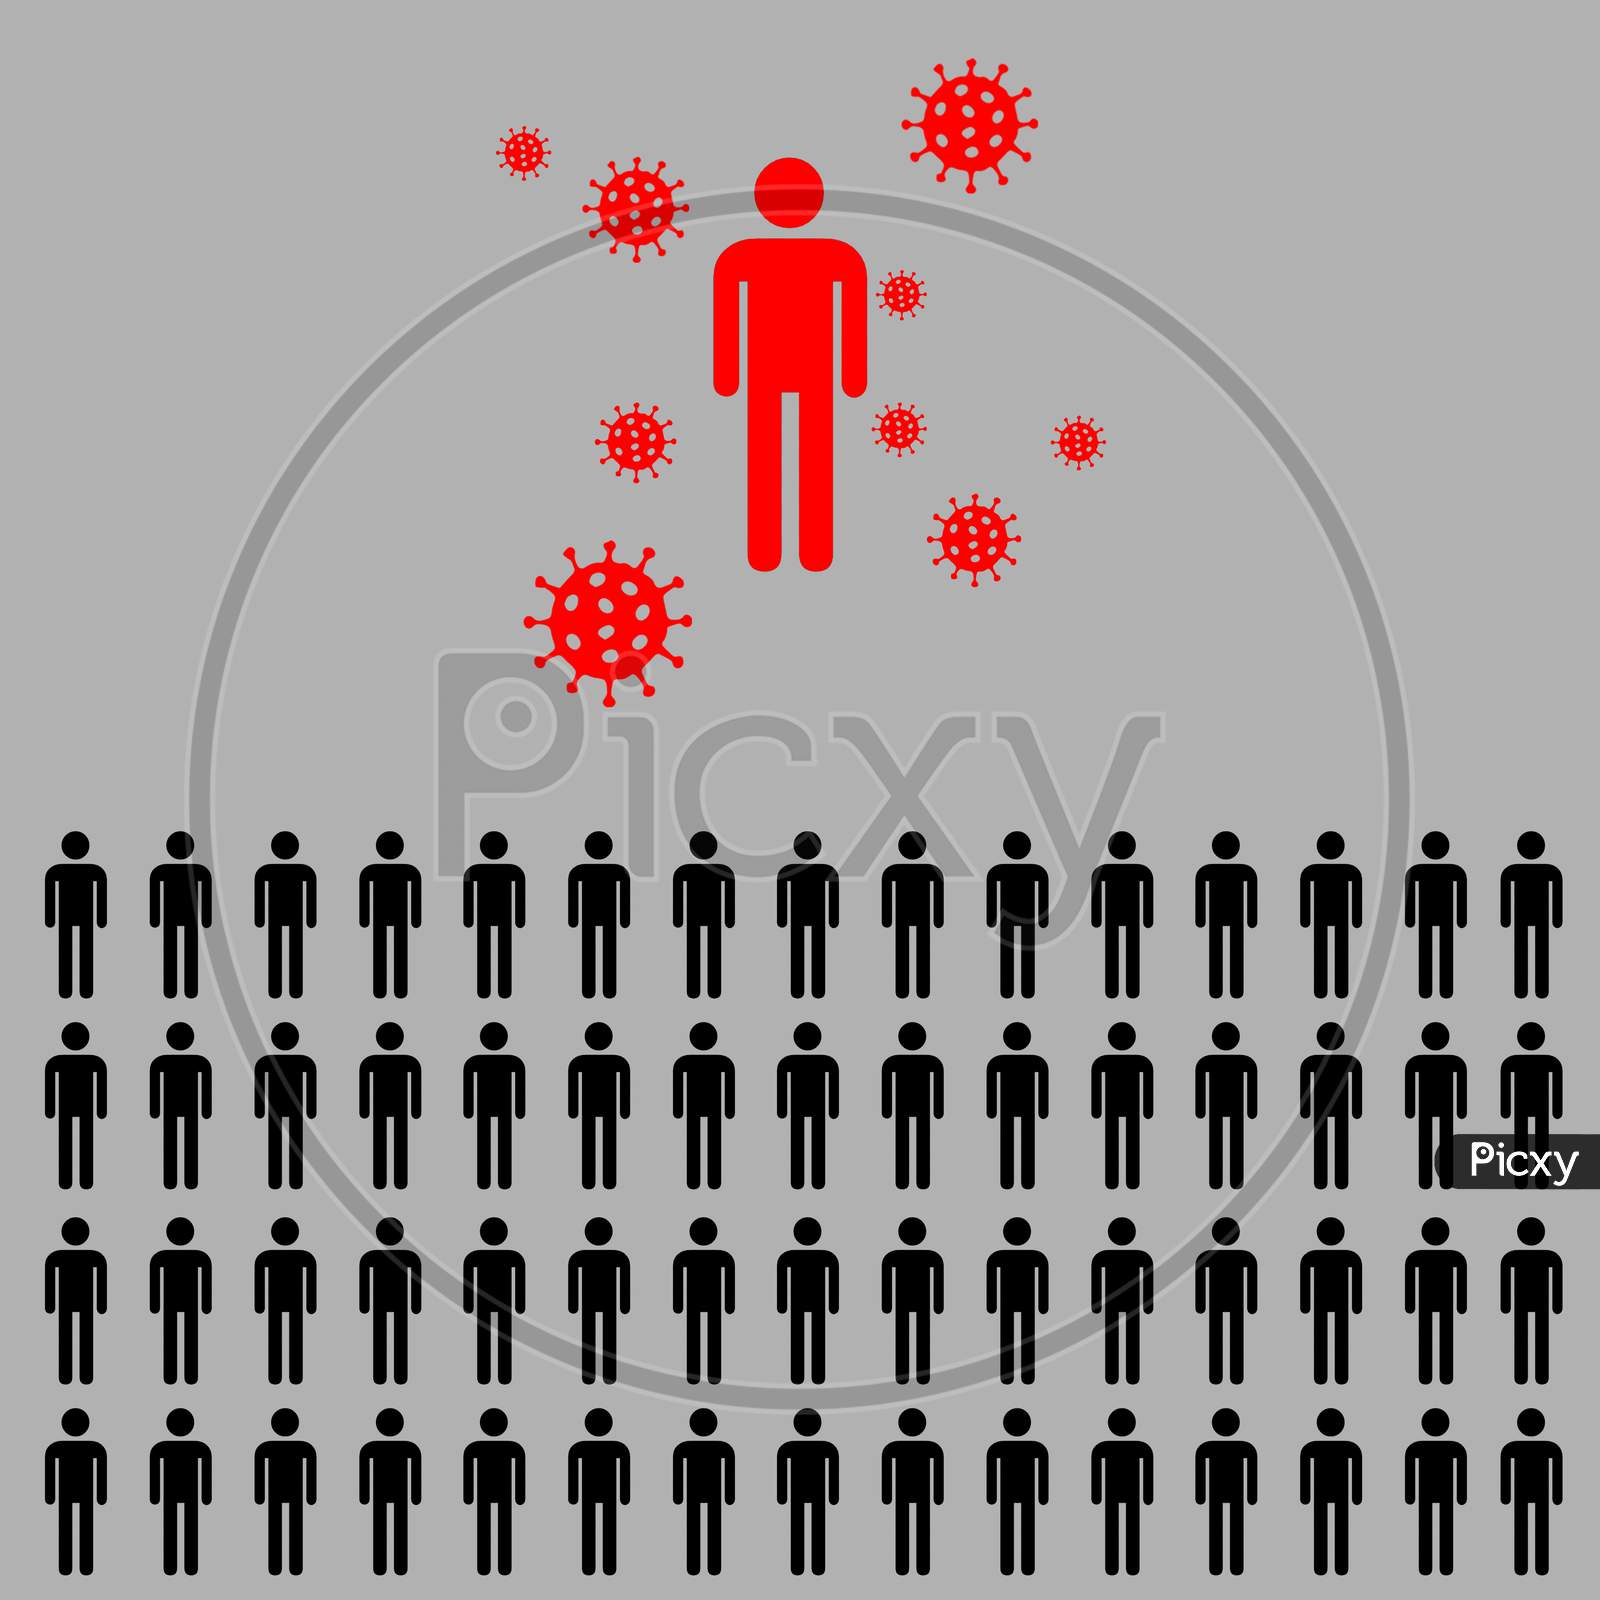 Illustration On Quarantine The Covid-19 Positive Patient To Prevent Its Spreading In The Society. To Stop Corona Virus To Spread In Society.